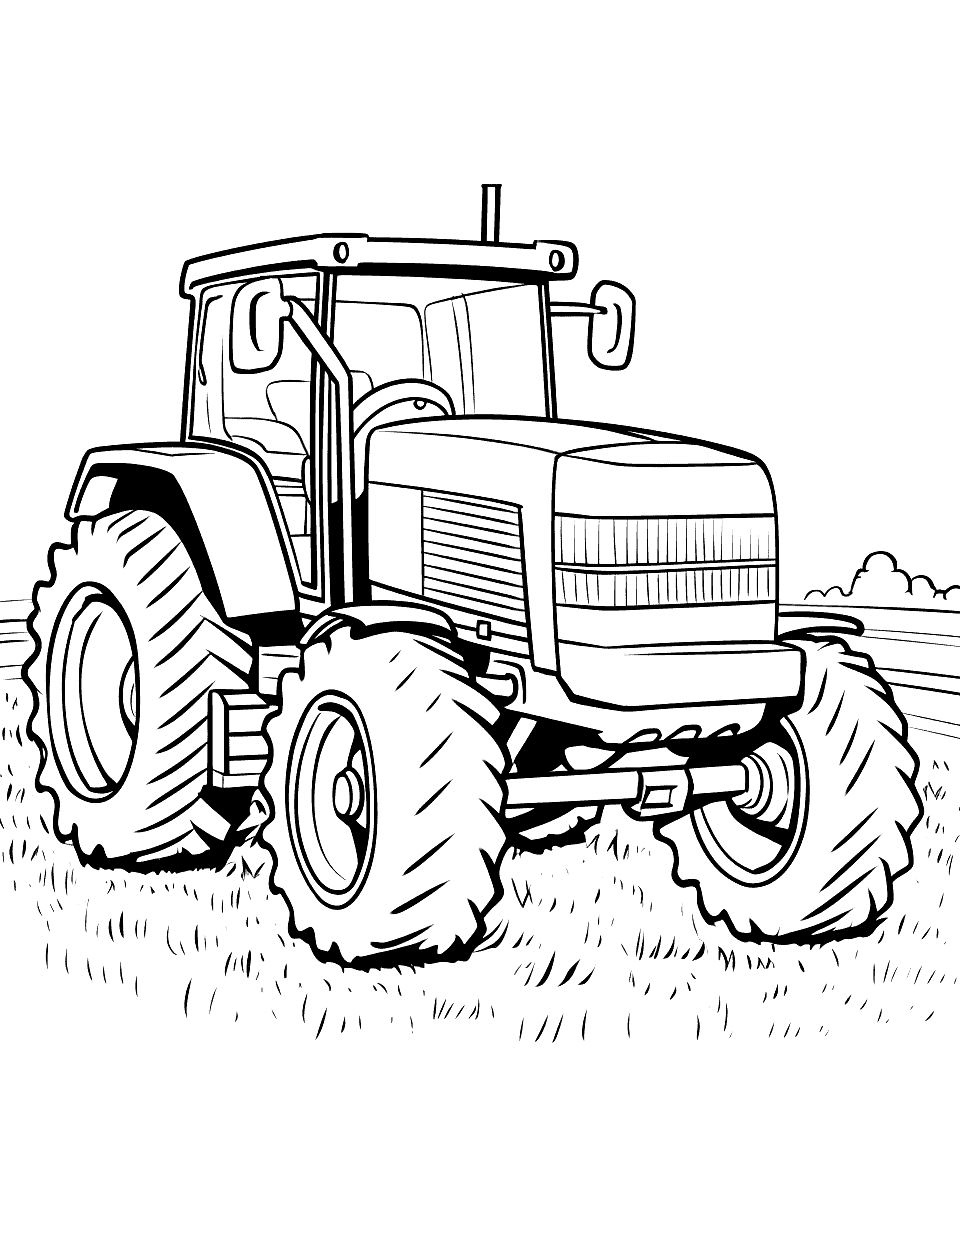 Big Tractor with Easy Design Coloring Page - A large tractor with bold outlines for easy design.